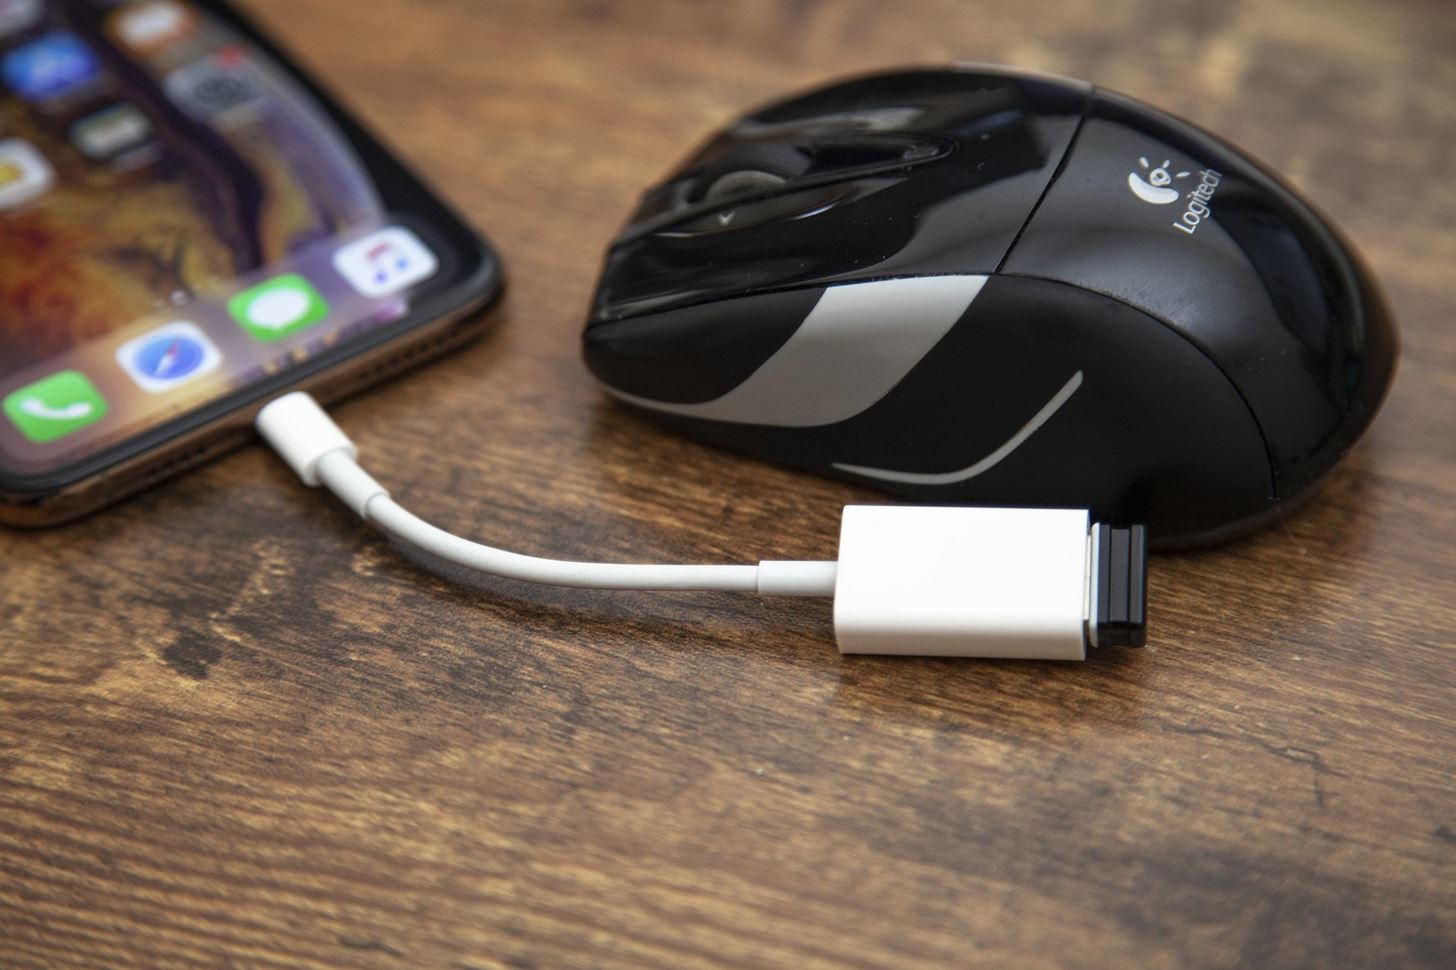 iPhone Mouse (How to Use it as a Wireless Mouse)